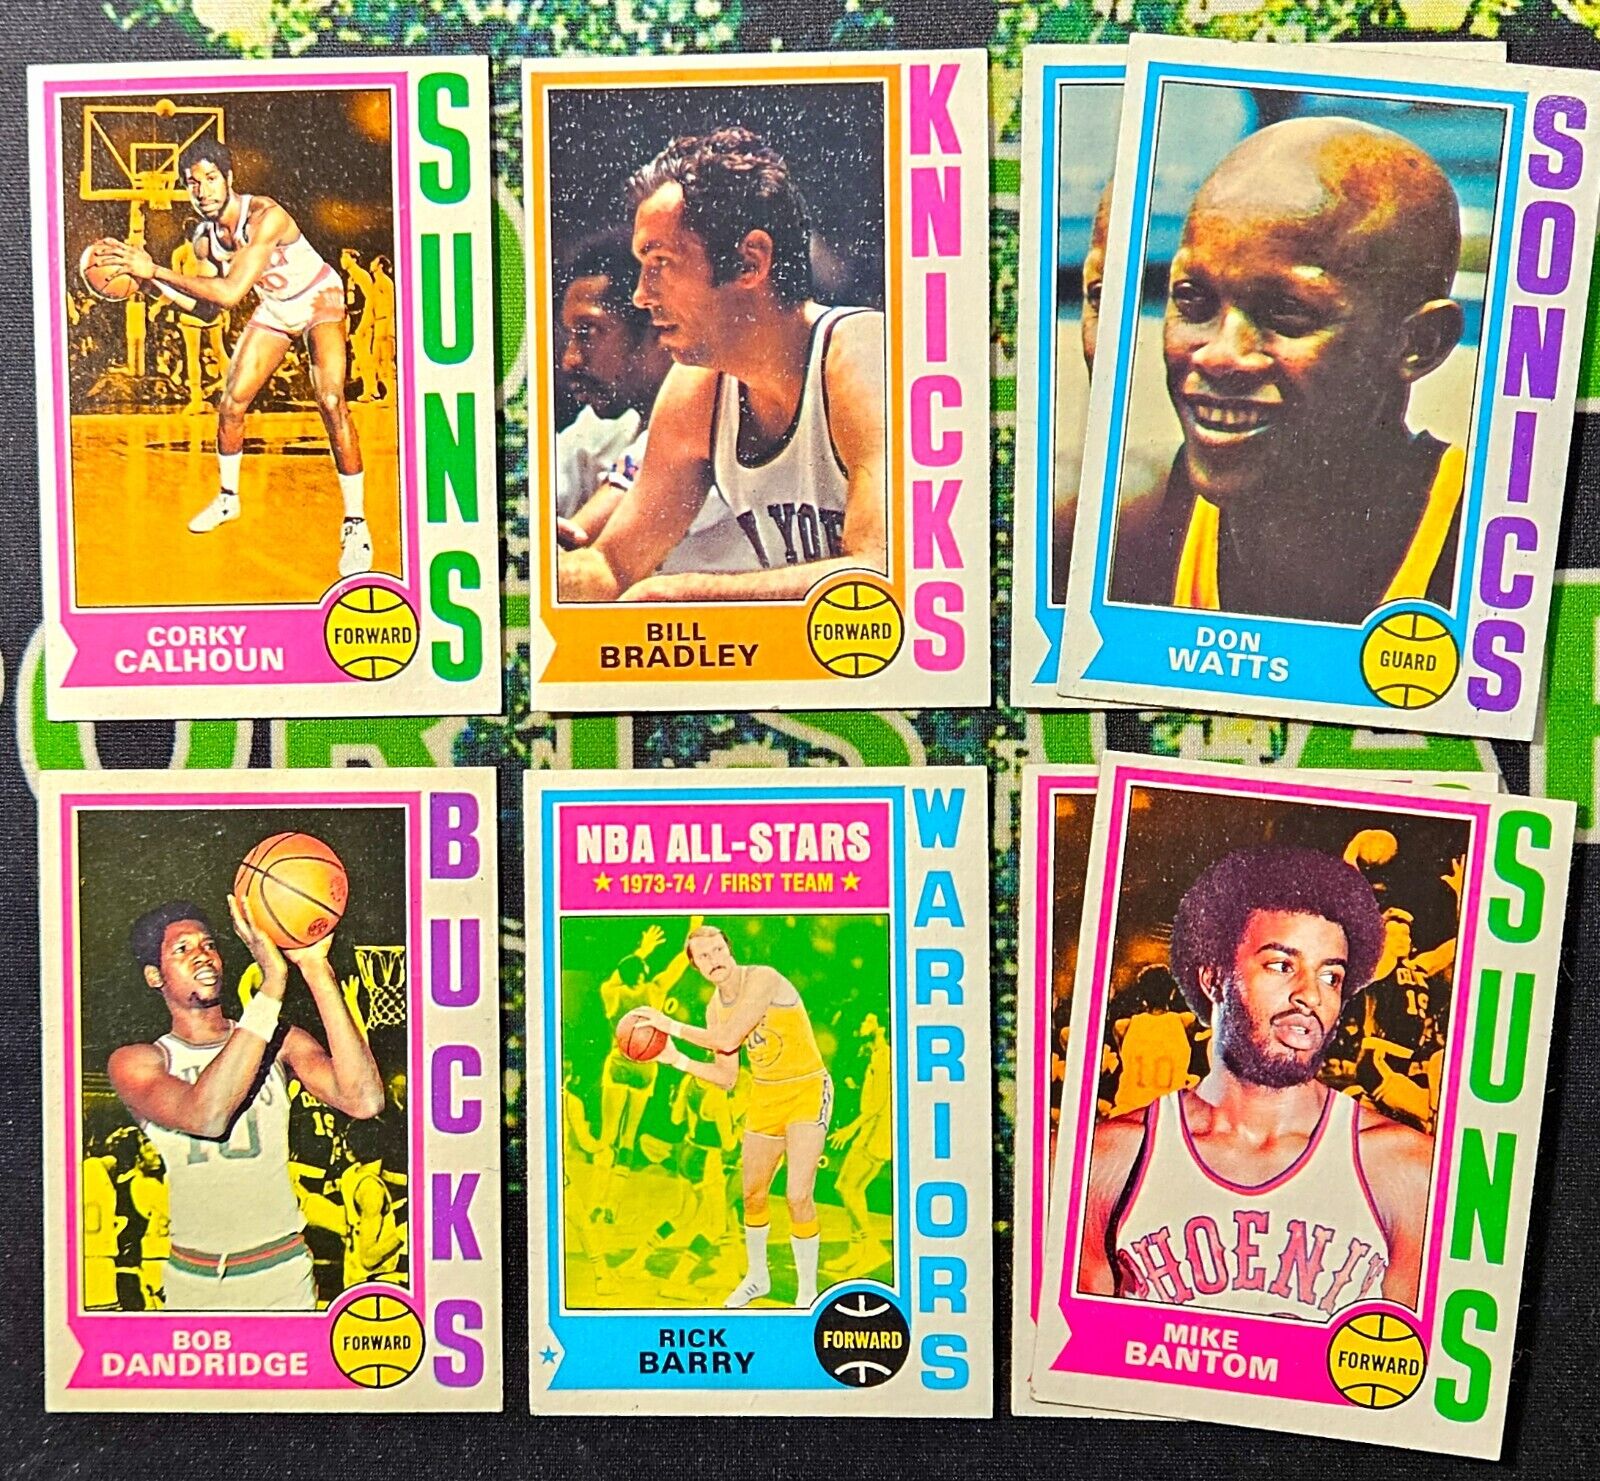 1974-75 Topps 8-Card Vintage Basketball Lot w/ 2 Don Watts Rookies + 5 More